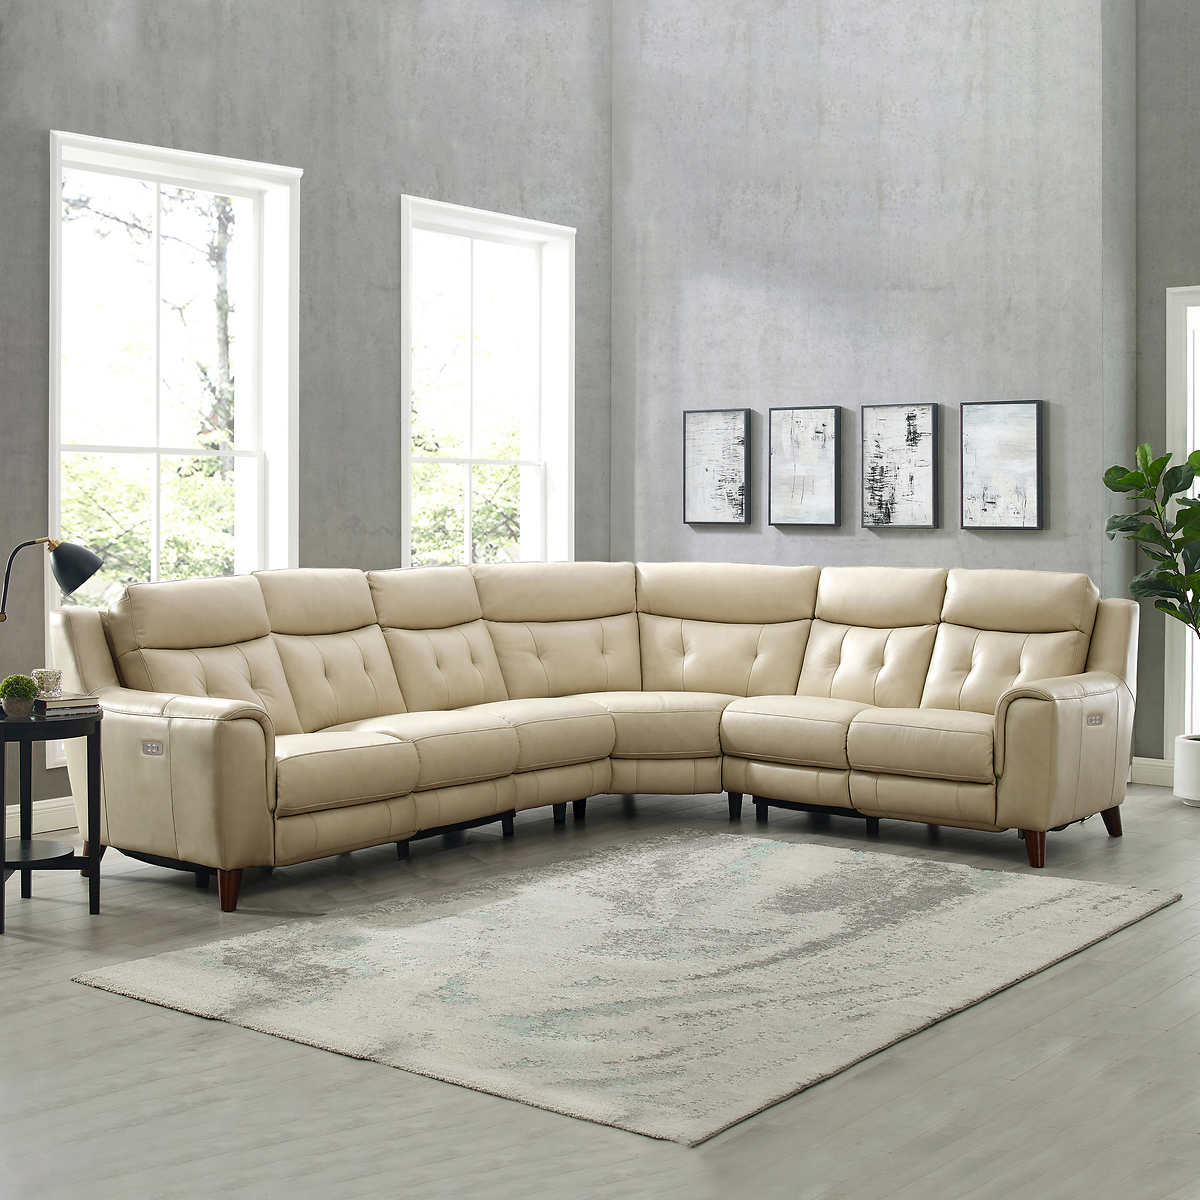 Campania Leather Power Reclining, White Leather Sofa Sectional Recliner